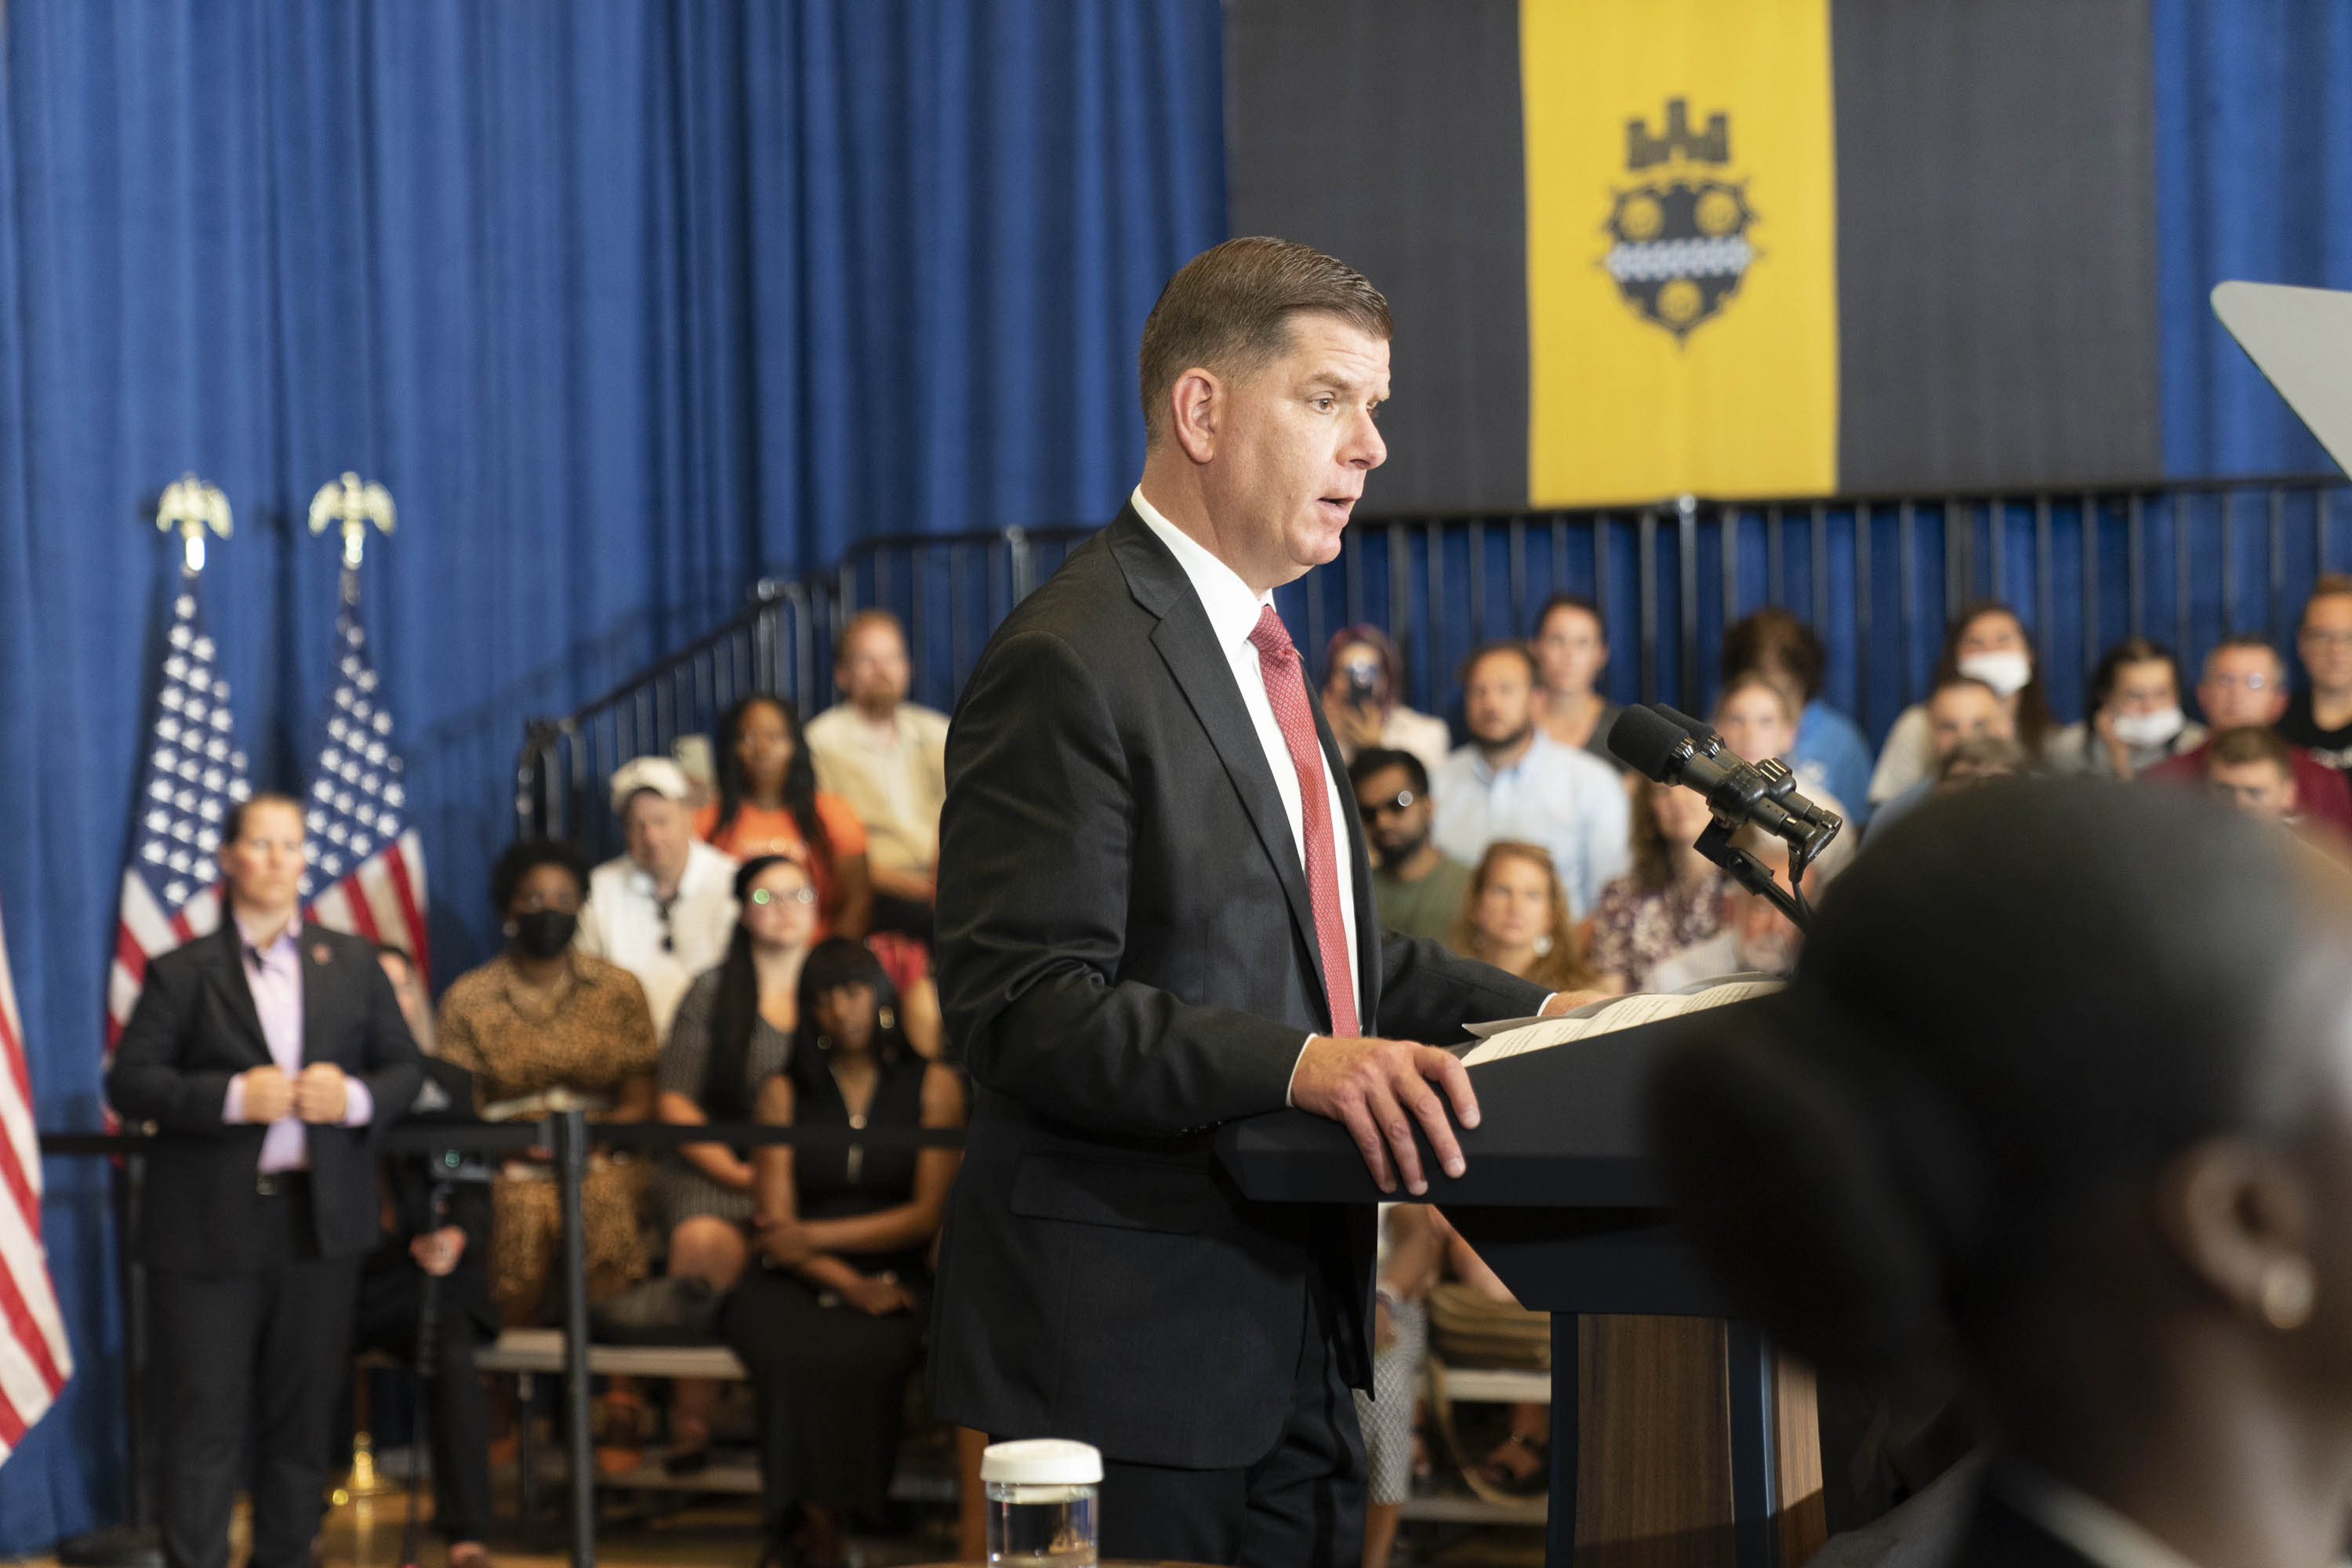 Secretary Marty Walsh speaks to a crowd in Pittsburgh